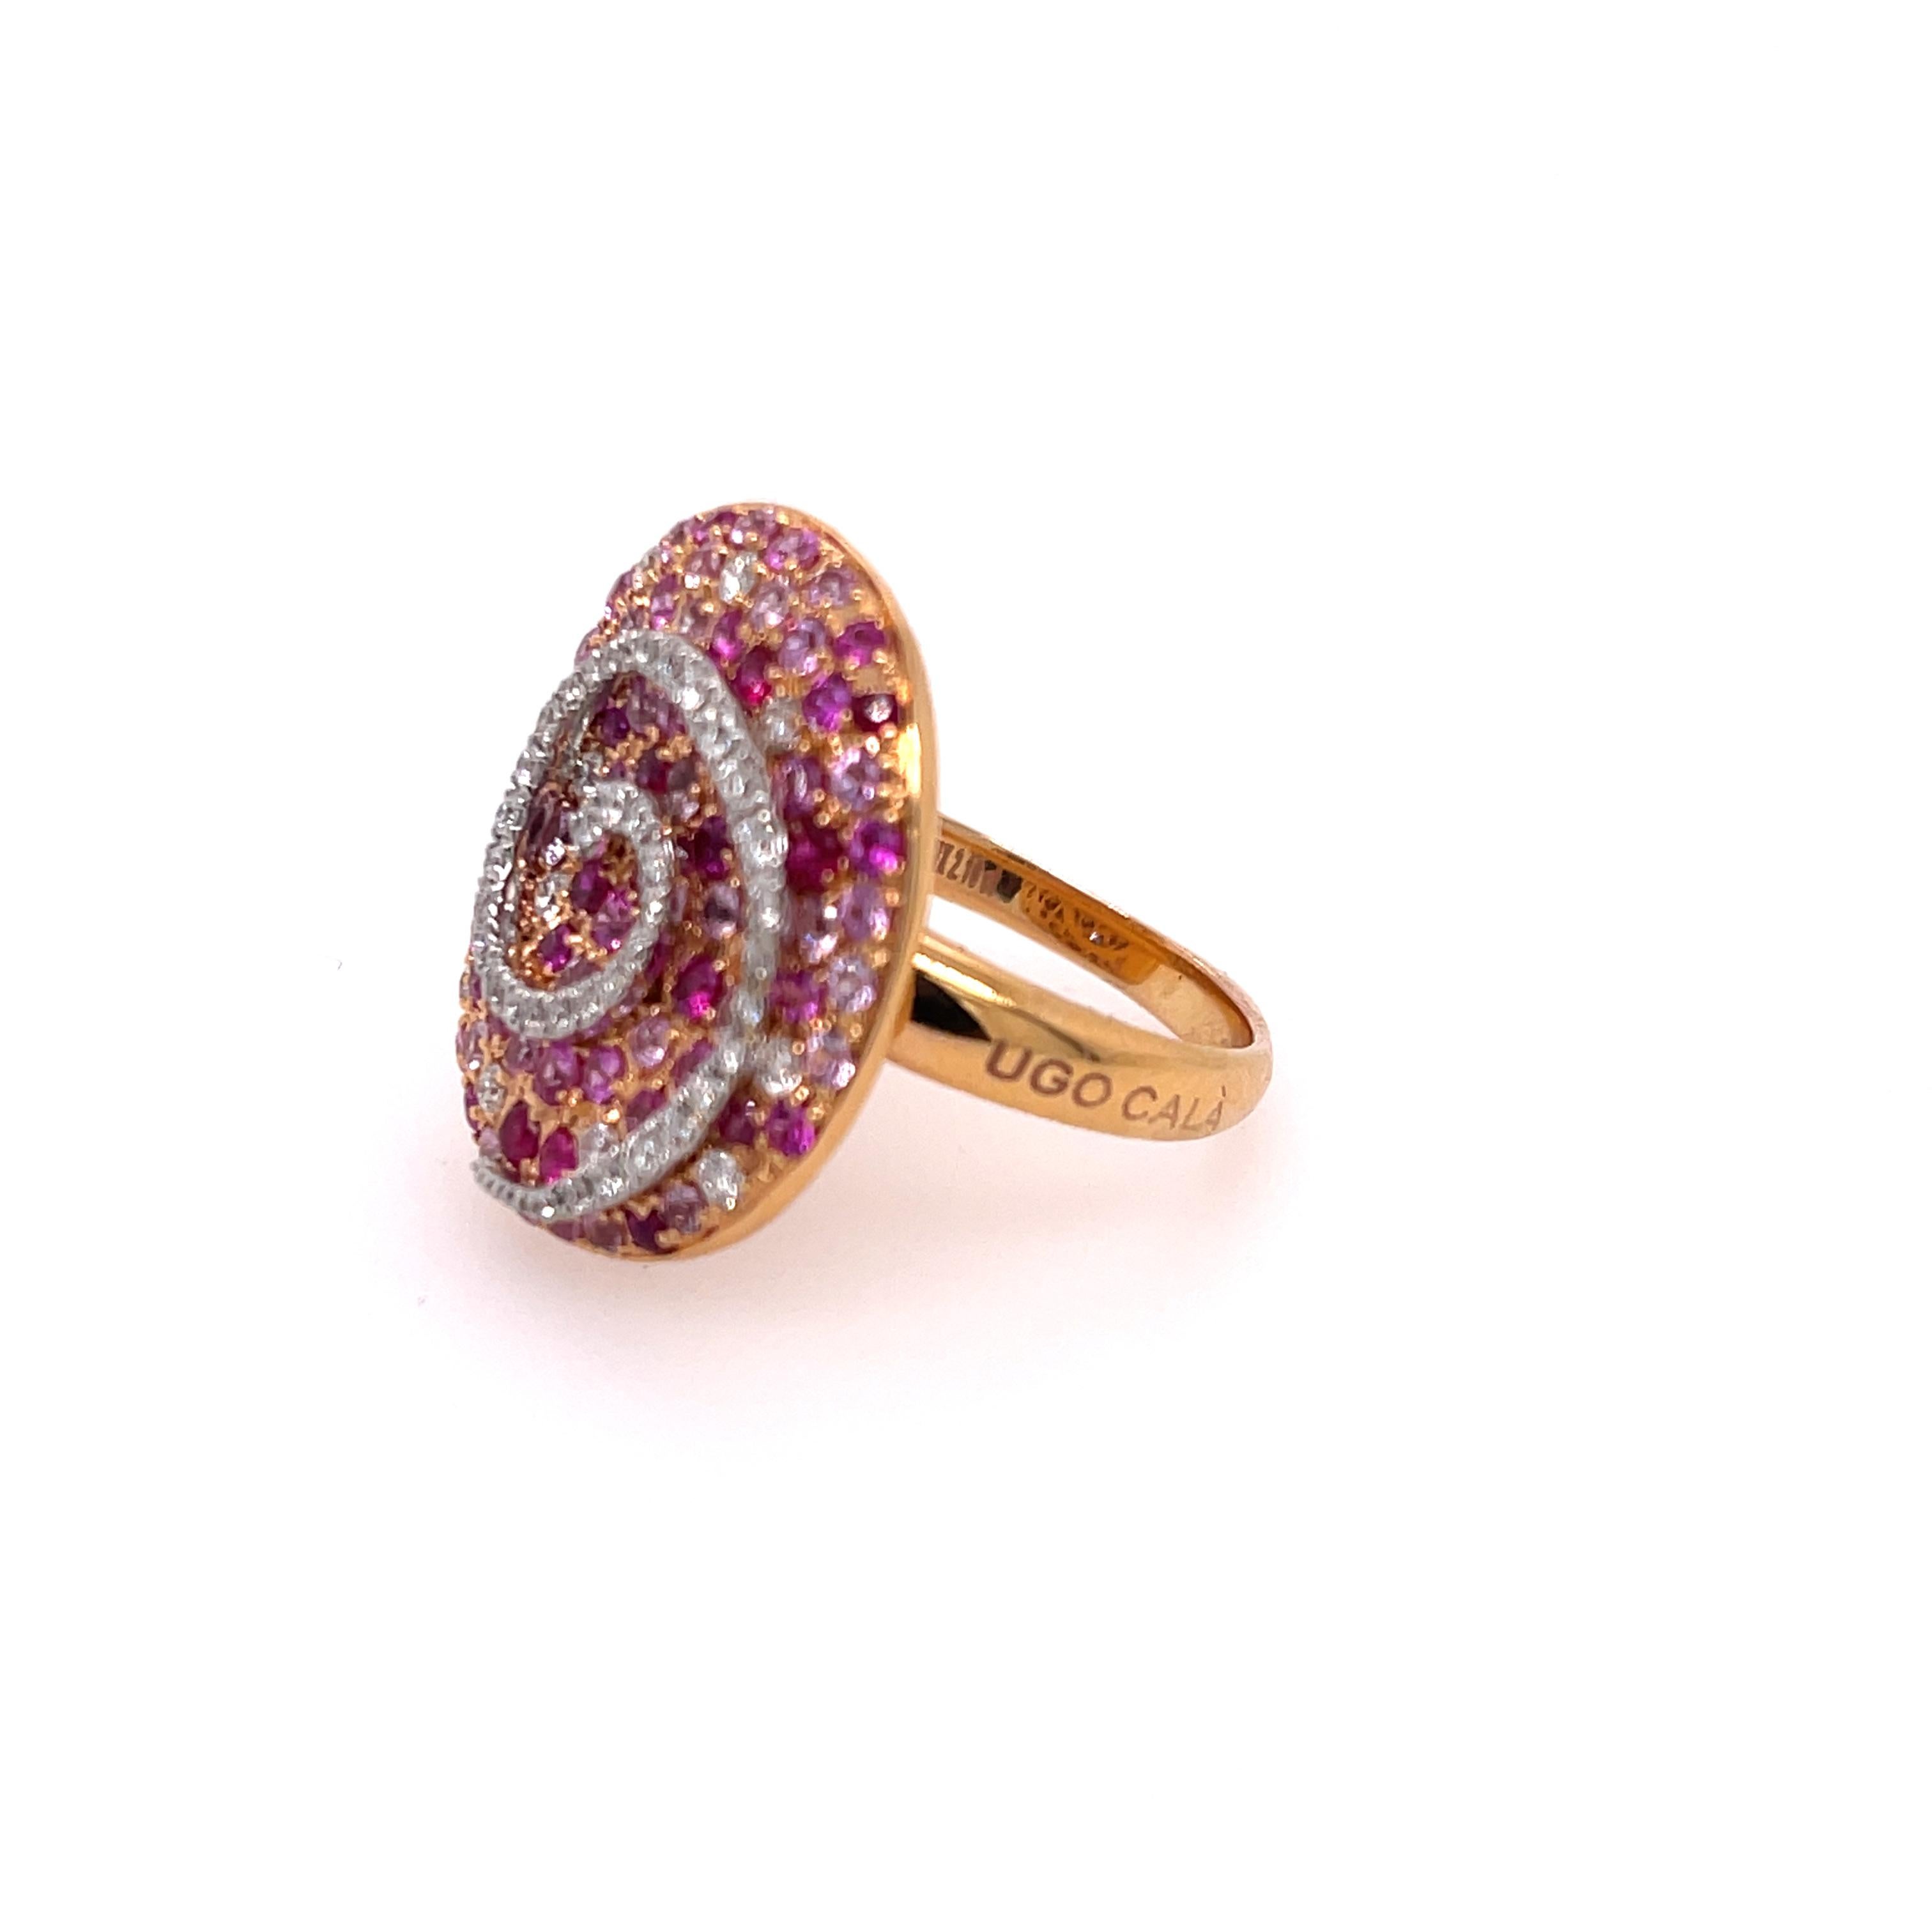 Round Cut Ugo Cala Diamond, Ruby, and Sapphire 18K Ring For Sale